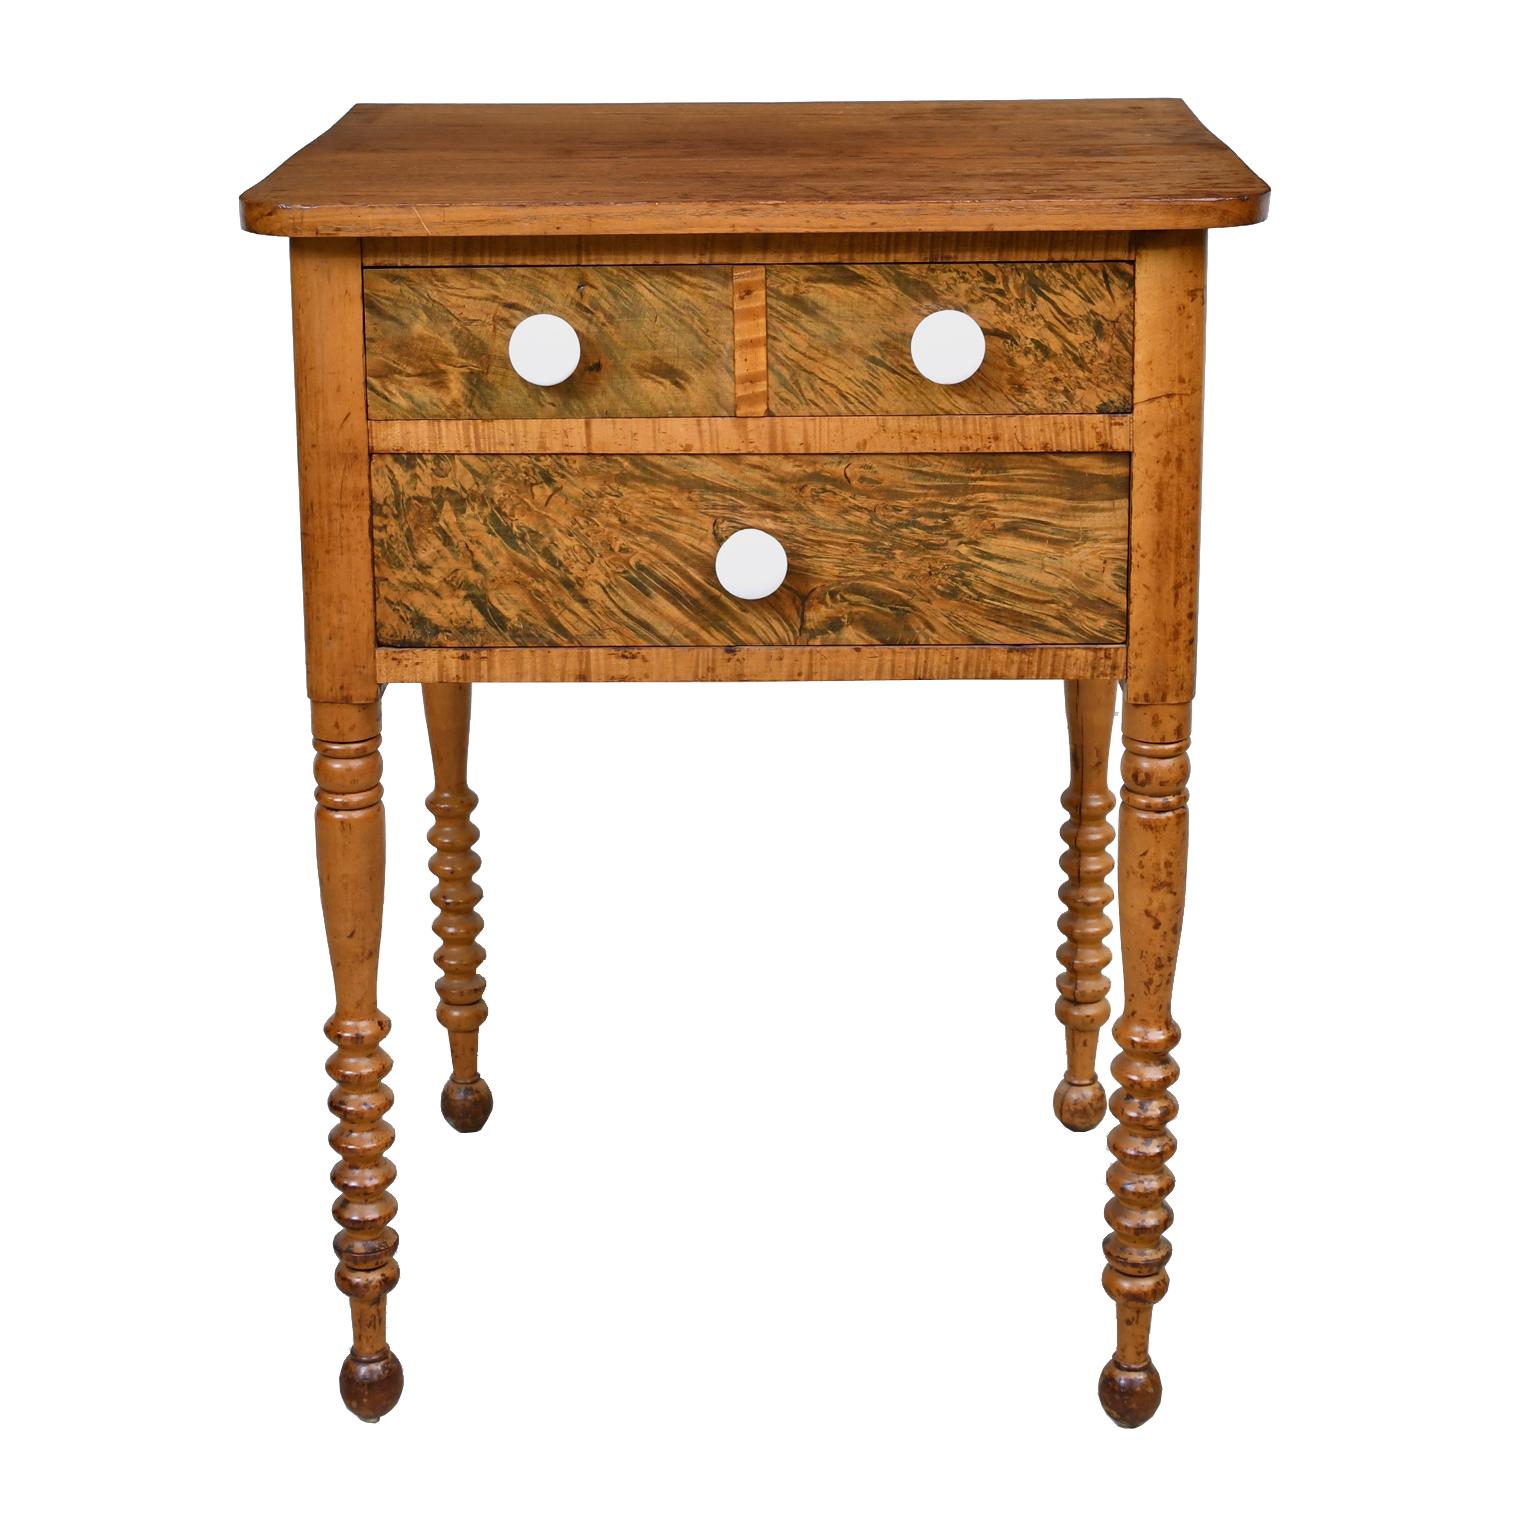 A small and well-proportioned federal table in beautiful fruitwood on turned legs that end in spool turnings, and offering two drawers with white porcelain pulls, Pennsylvania, circa 1820.
Measures: 23